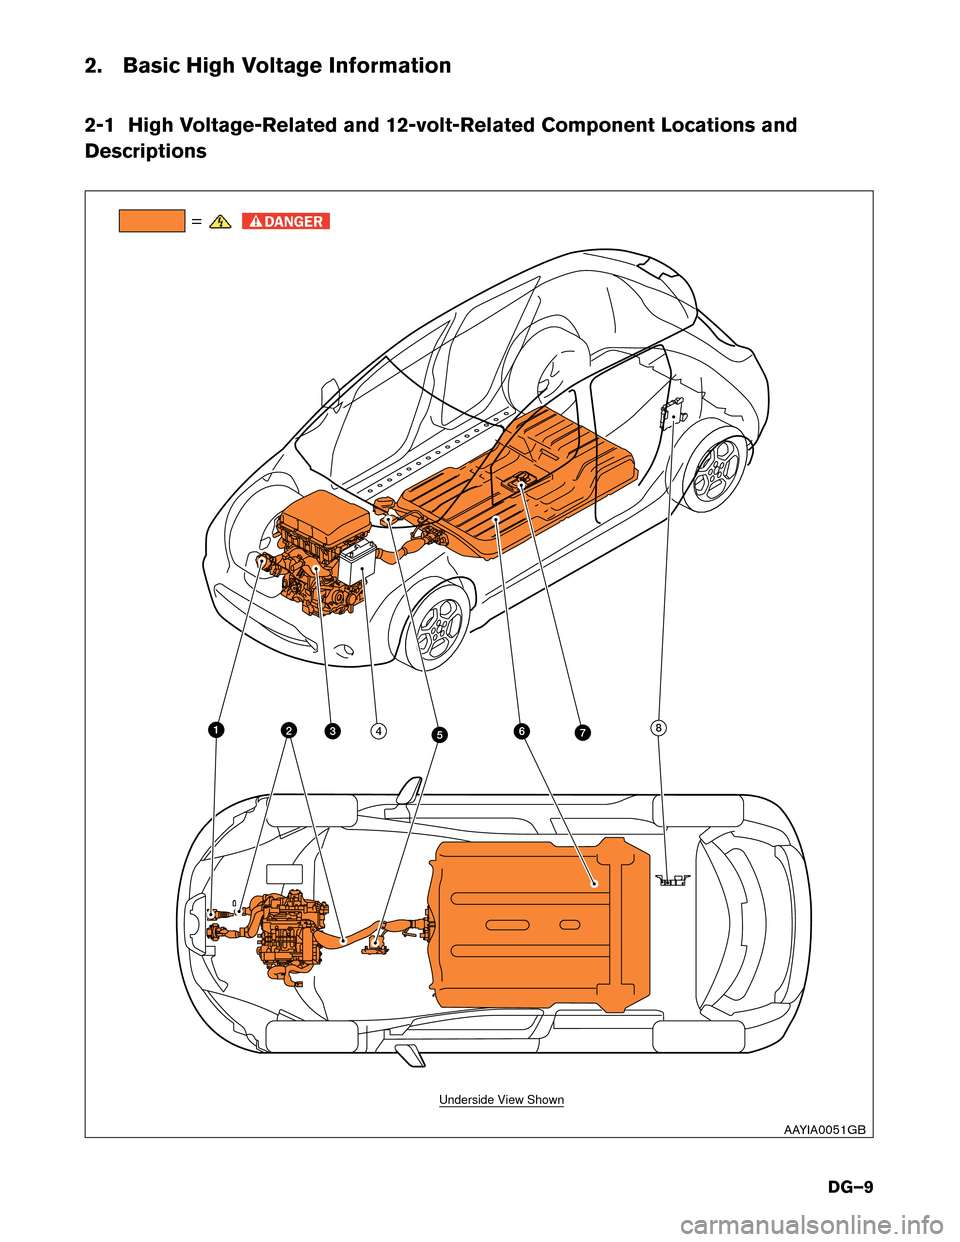 NISSAN LEAF 2016 1.G Dismantling Guide 2. Basic High Voltage Information
2-1
High Voltage-Related and 12-volt-Related Component Locations and
Descriptions =
76
342 8
5 1
Underside View Shown
AAYIA0051GB
DG–9  